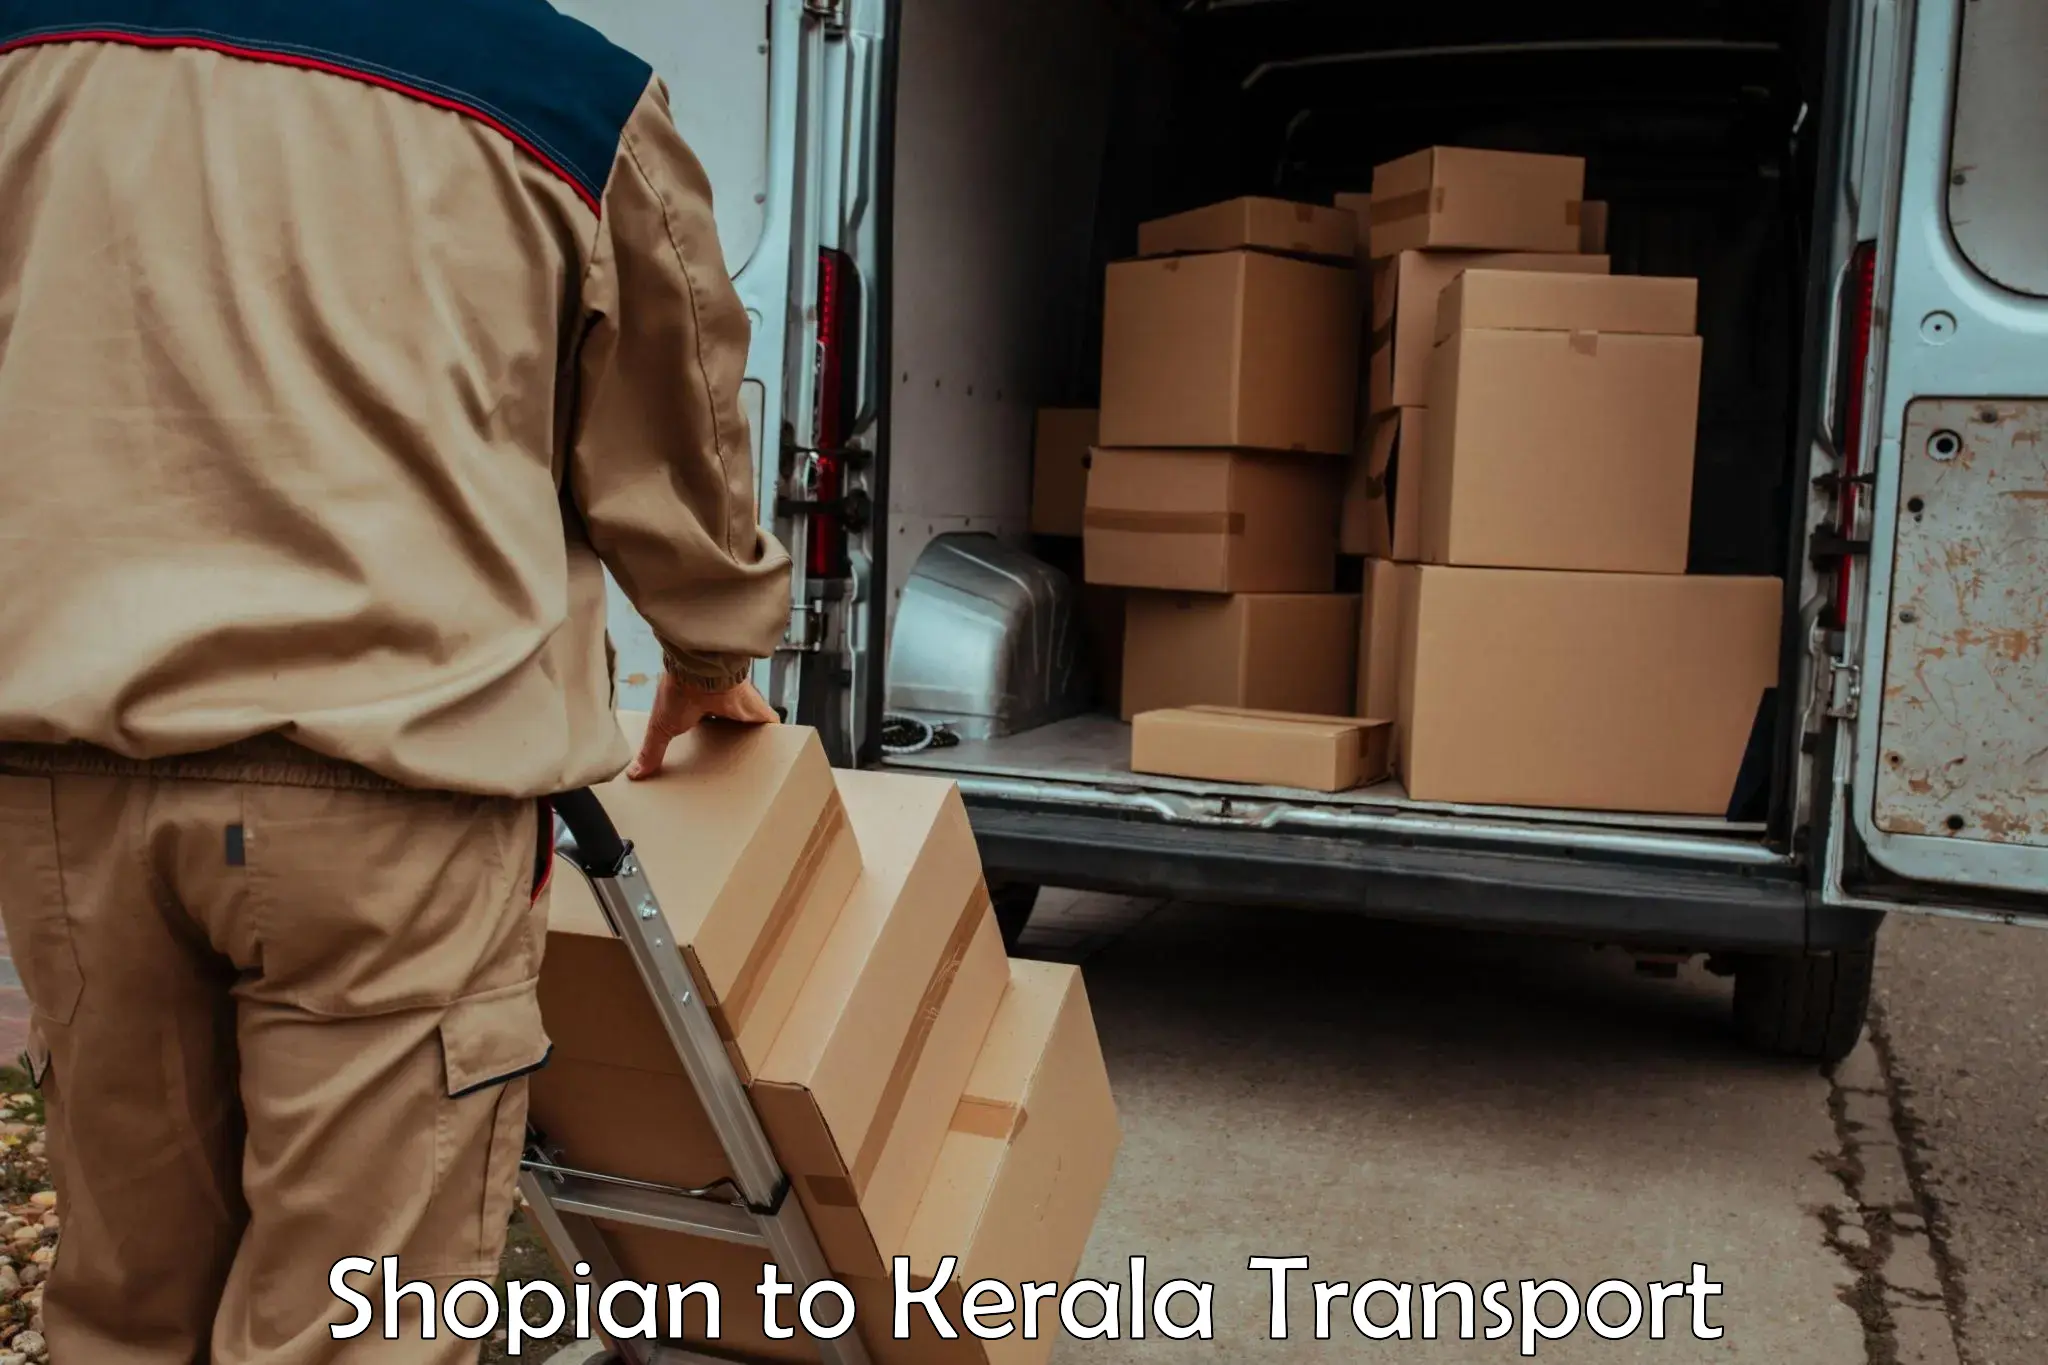 Delivery service Shopian to Attingal